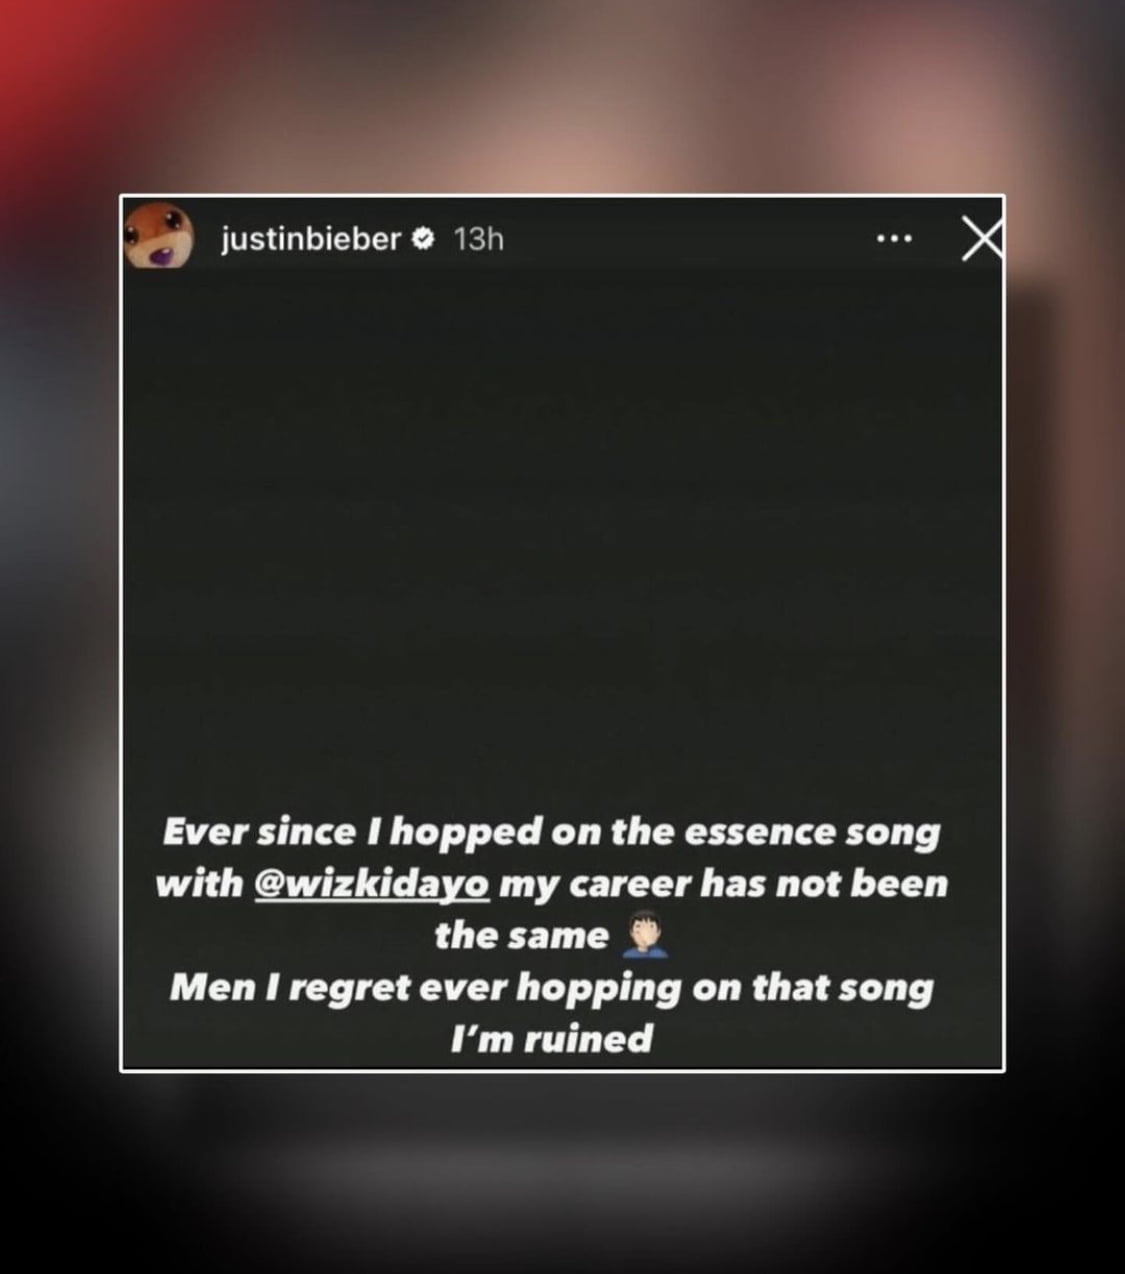 Justin Bieber shares how he regrets hopping on Wizkid’s Essence song.